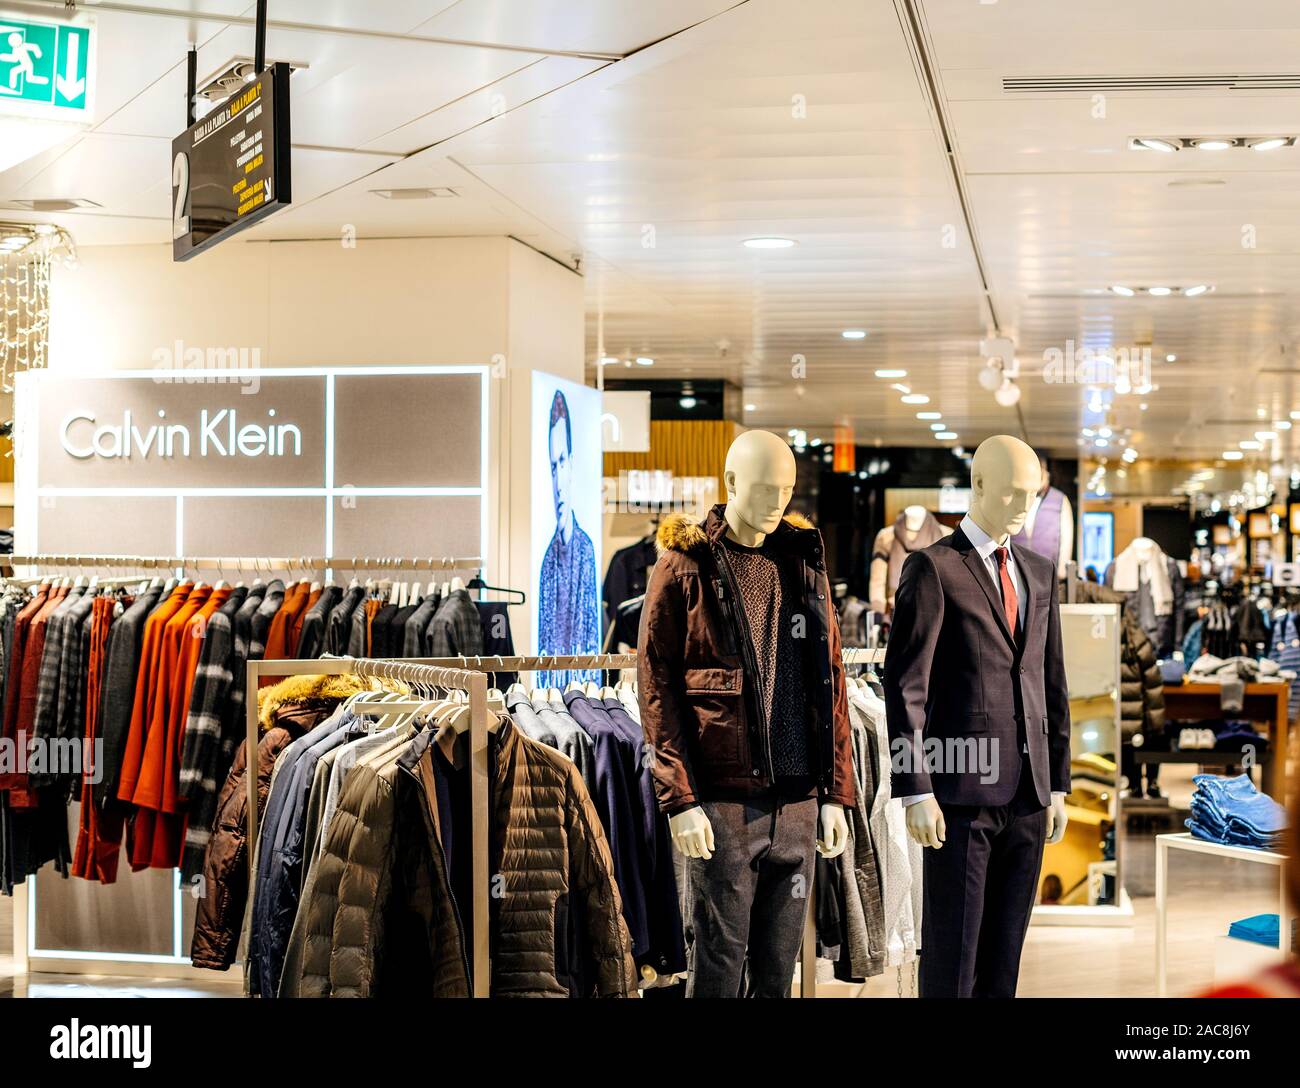 Barcelona, Spain - Nov 17, 2017: Front view of Two mannequins male silhouettes wearing luxury silk jackets costumes in upscale fashion clothes store Calvin Klein in El Corte Ingles Mall Stock Photo